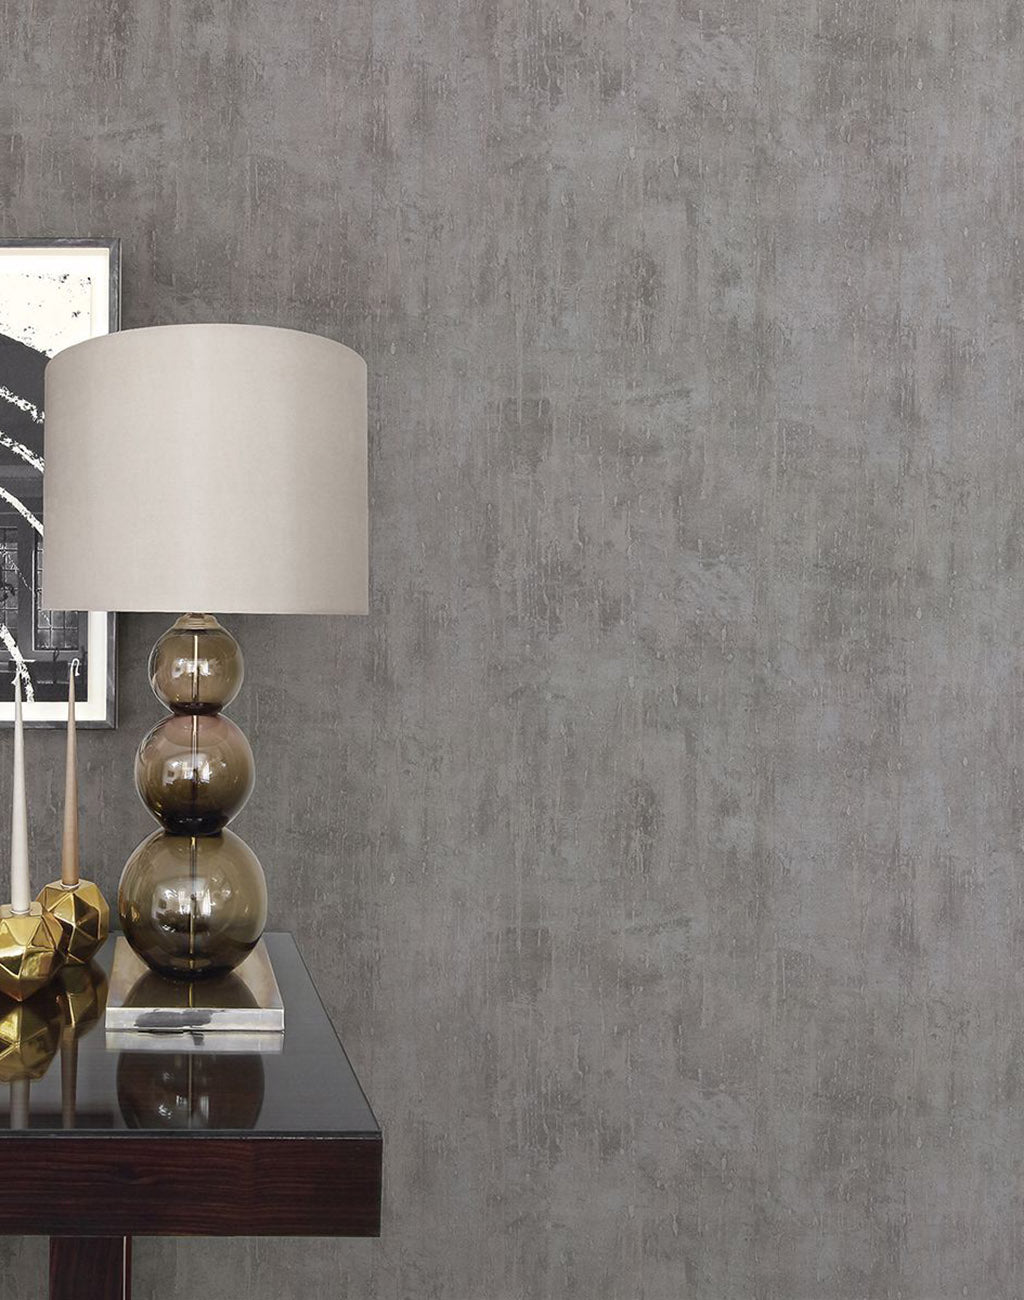 Industrial Wallpaper; now adding a polished seamless look to your walls!